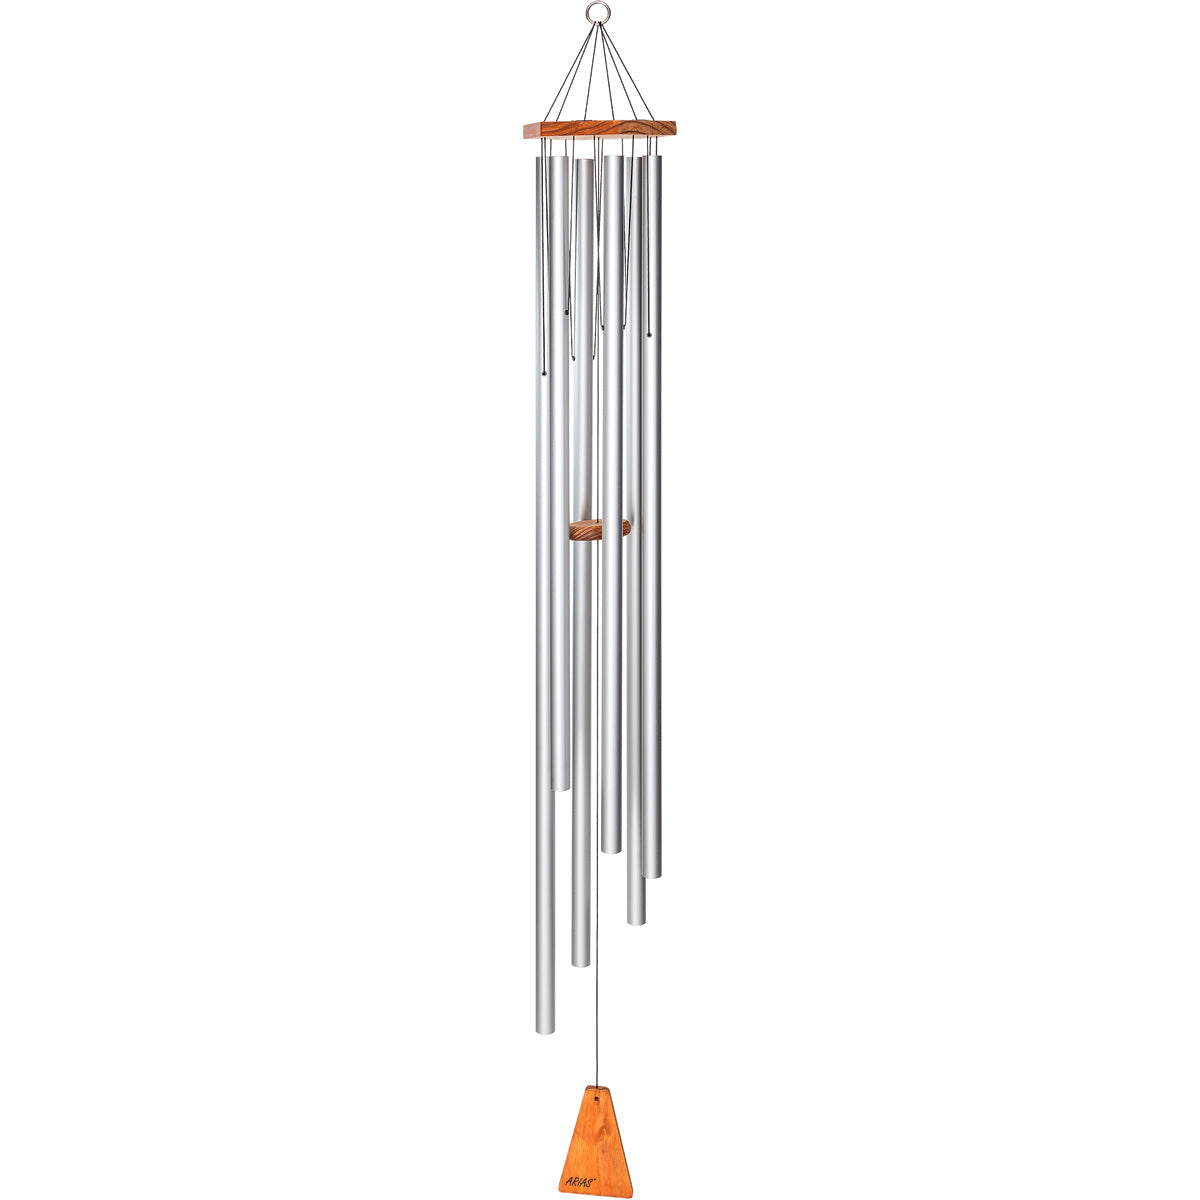 Arias 58-inch Wind Chime - Silver Finish Tubes